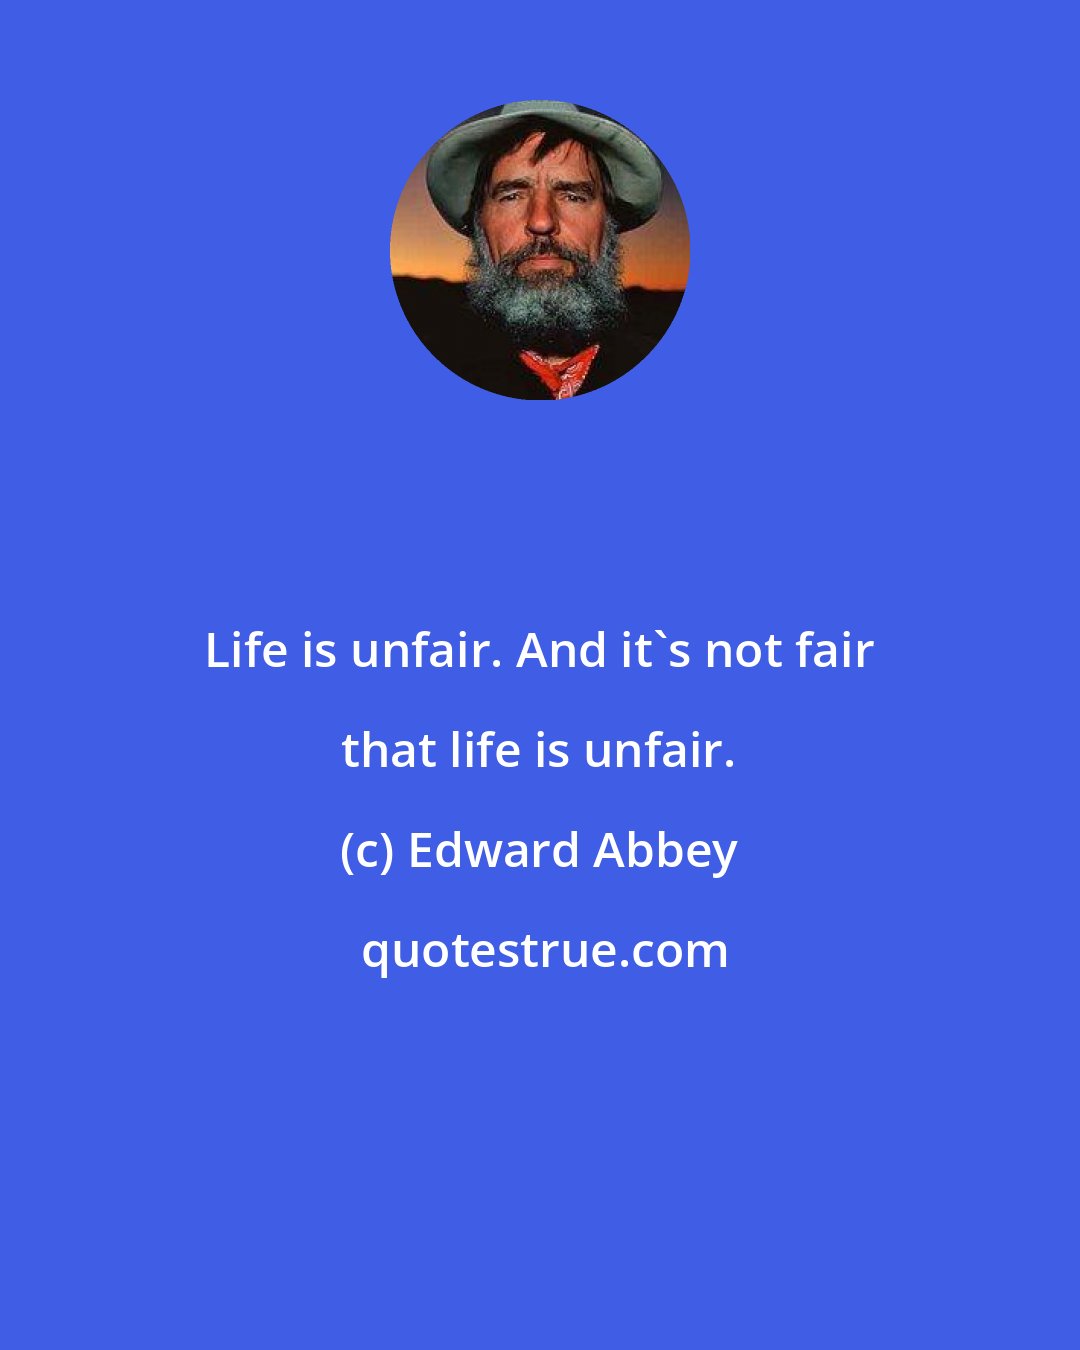 Edward Abbey: Life is unfair. And it's not fair that life is unfair.